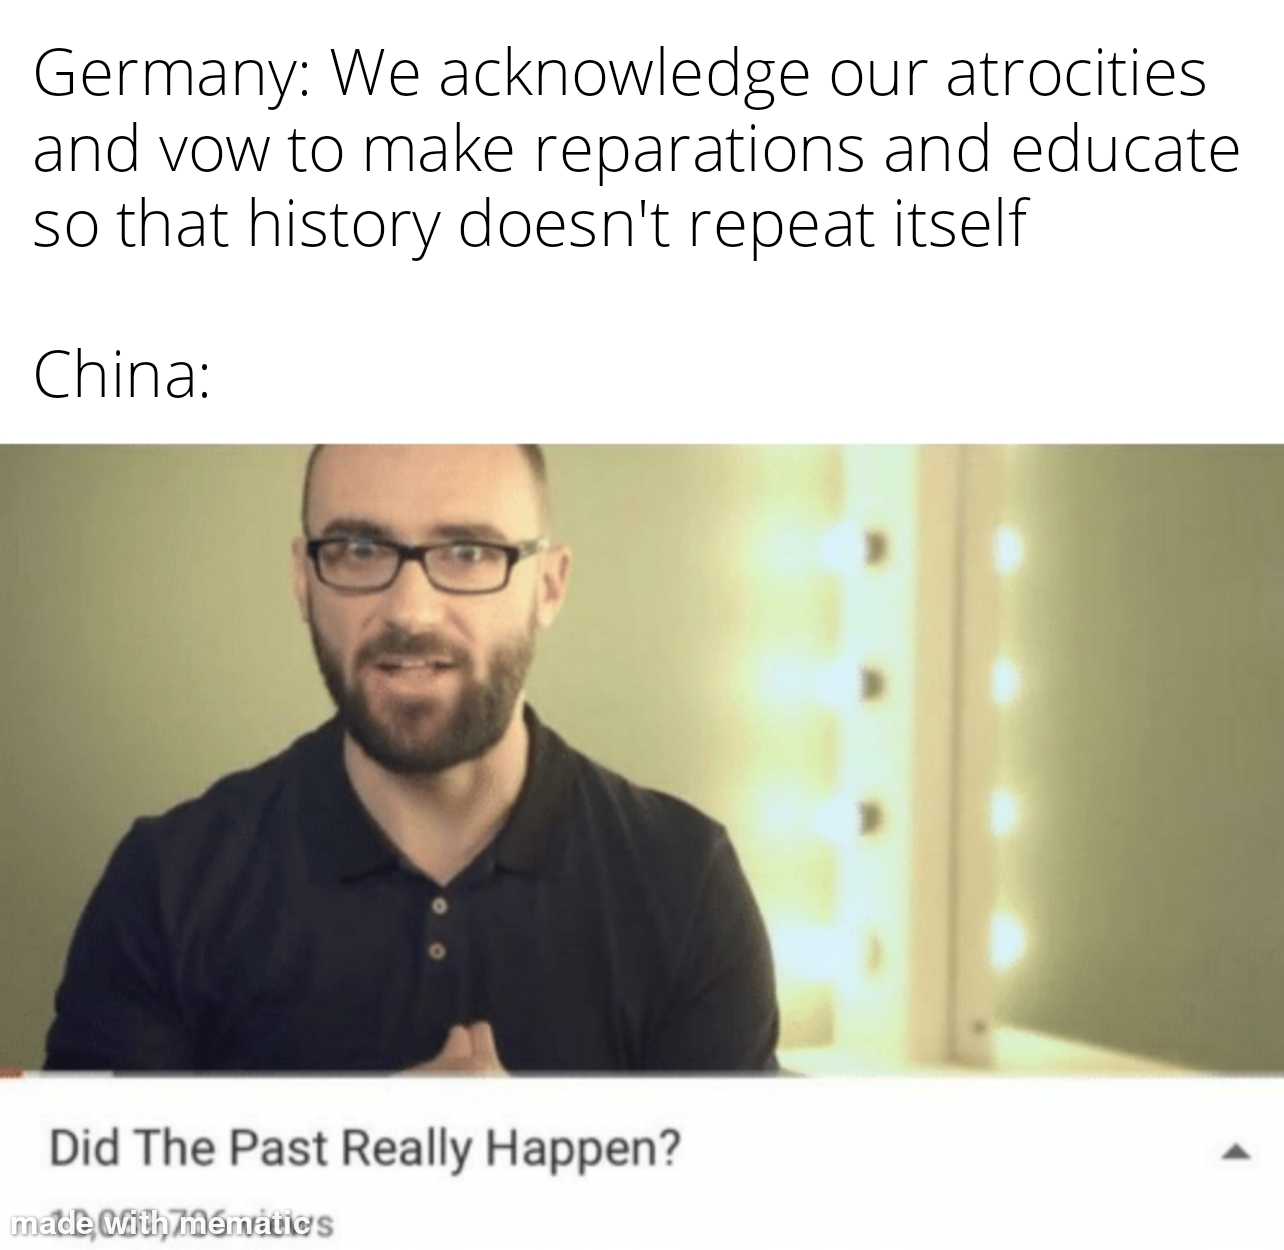 funny memes and pics - human behavior - Germany We acknowledge our atrocities and vow to make reparations and educate so that history doesn't repeat itself China Did The Past Really Happen? made, C01,7mniule's